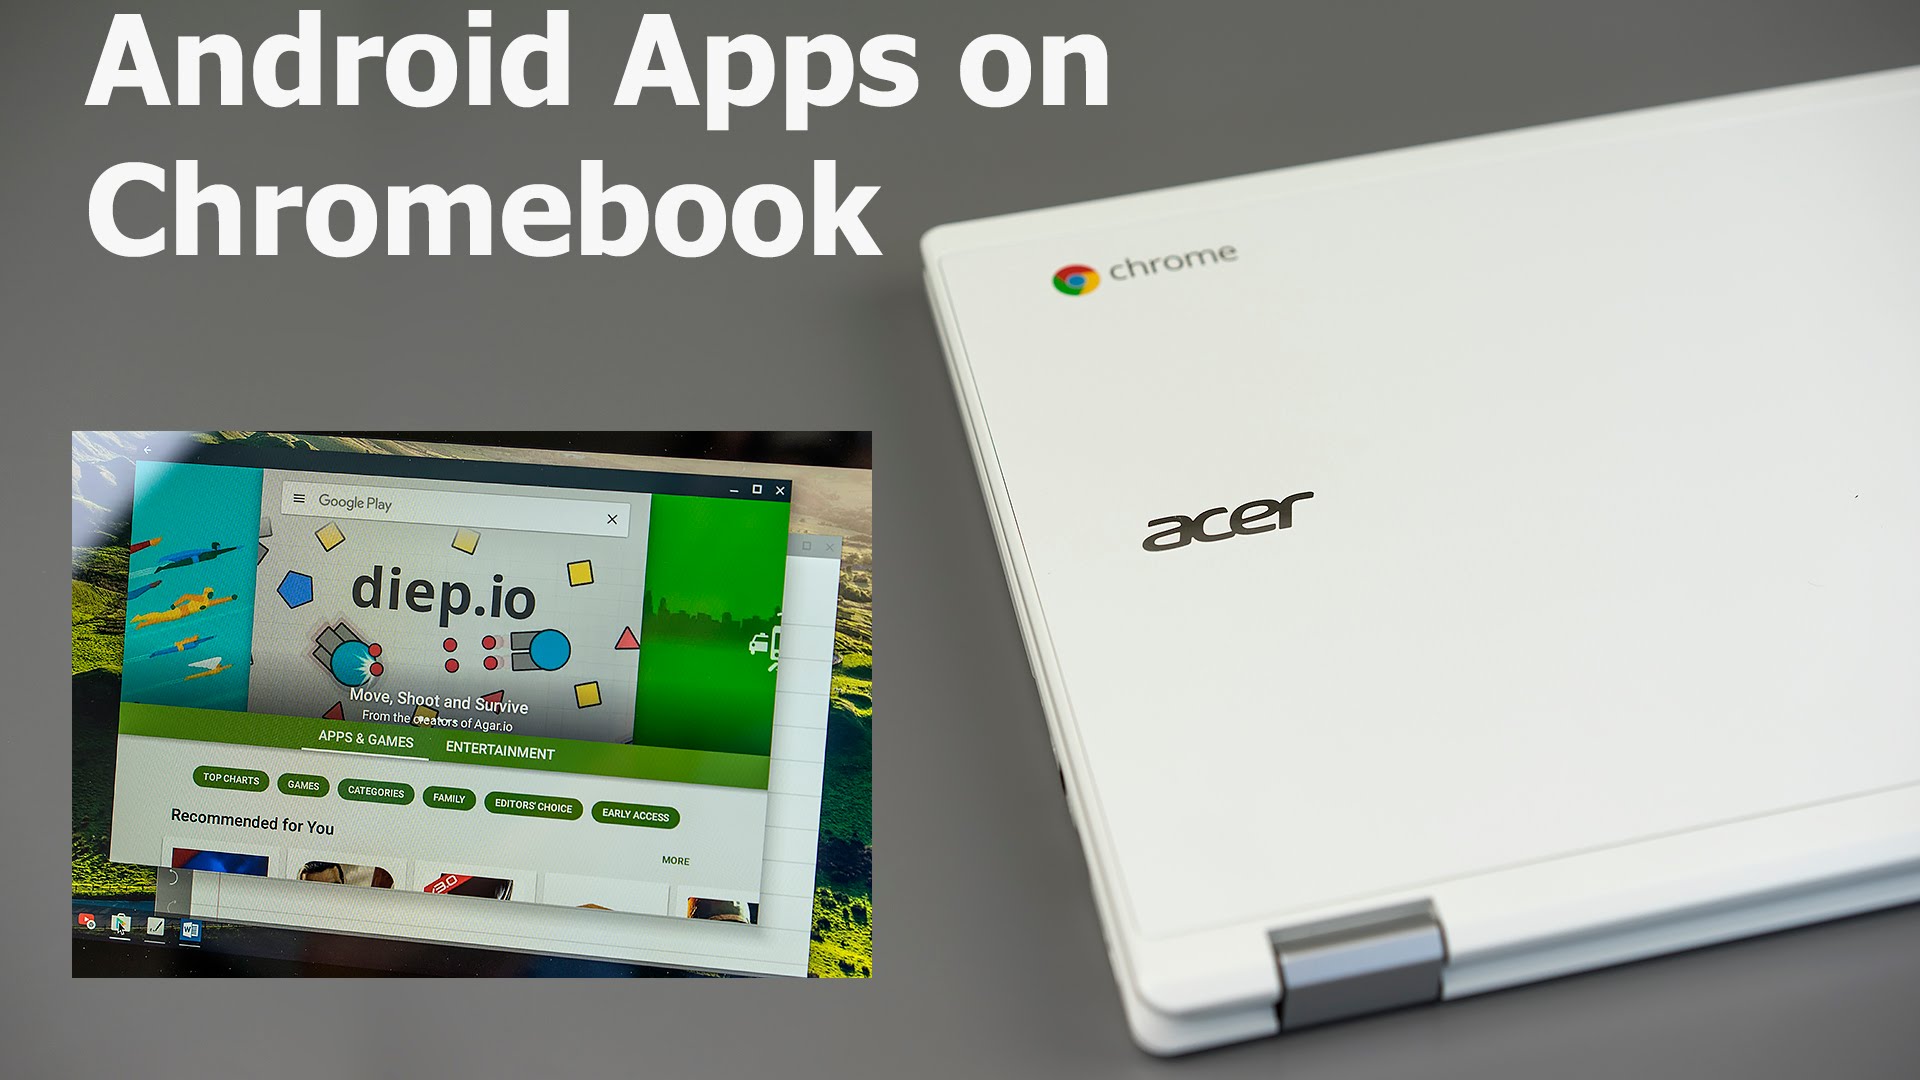 57 Best Pictures Android Apps On Chromebook 2020 - How to delete apps on Chromebook in less than 60 seconds